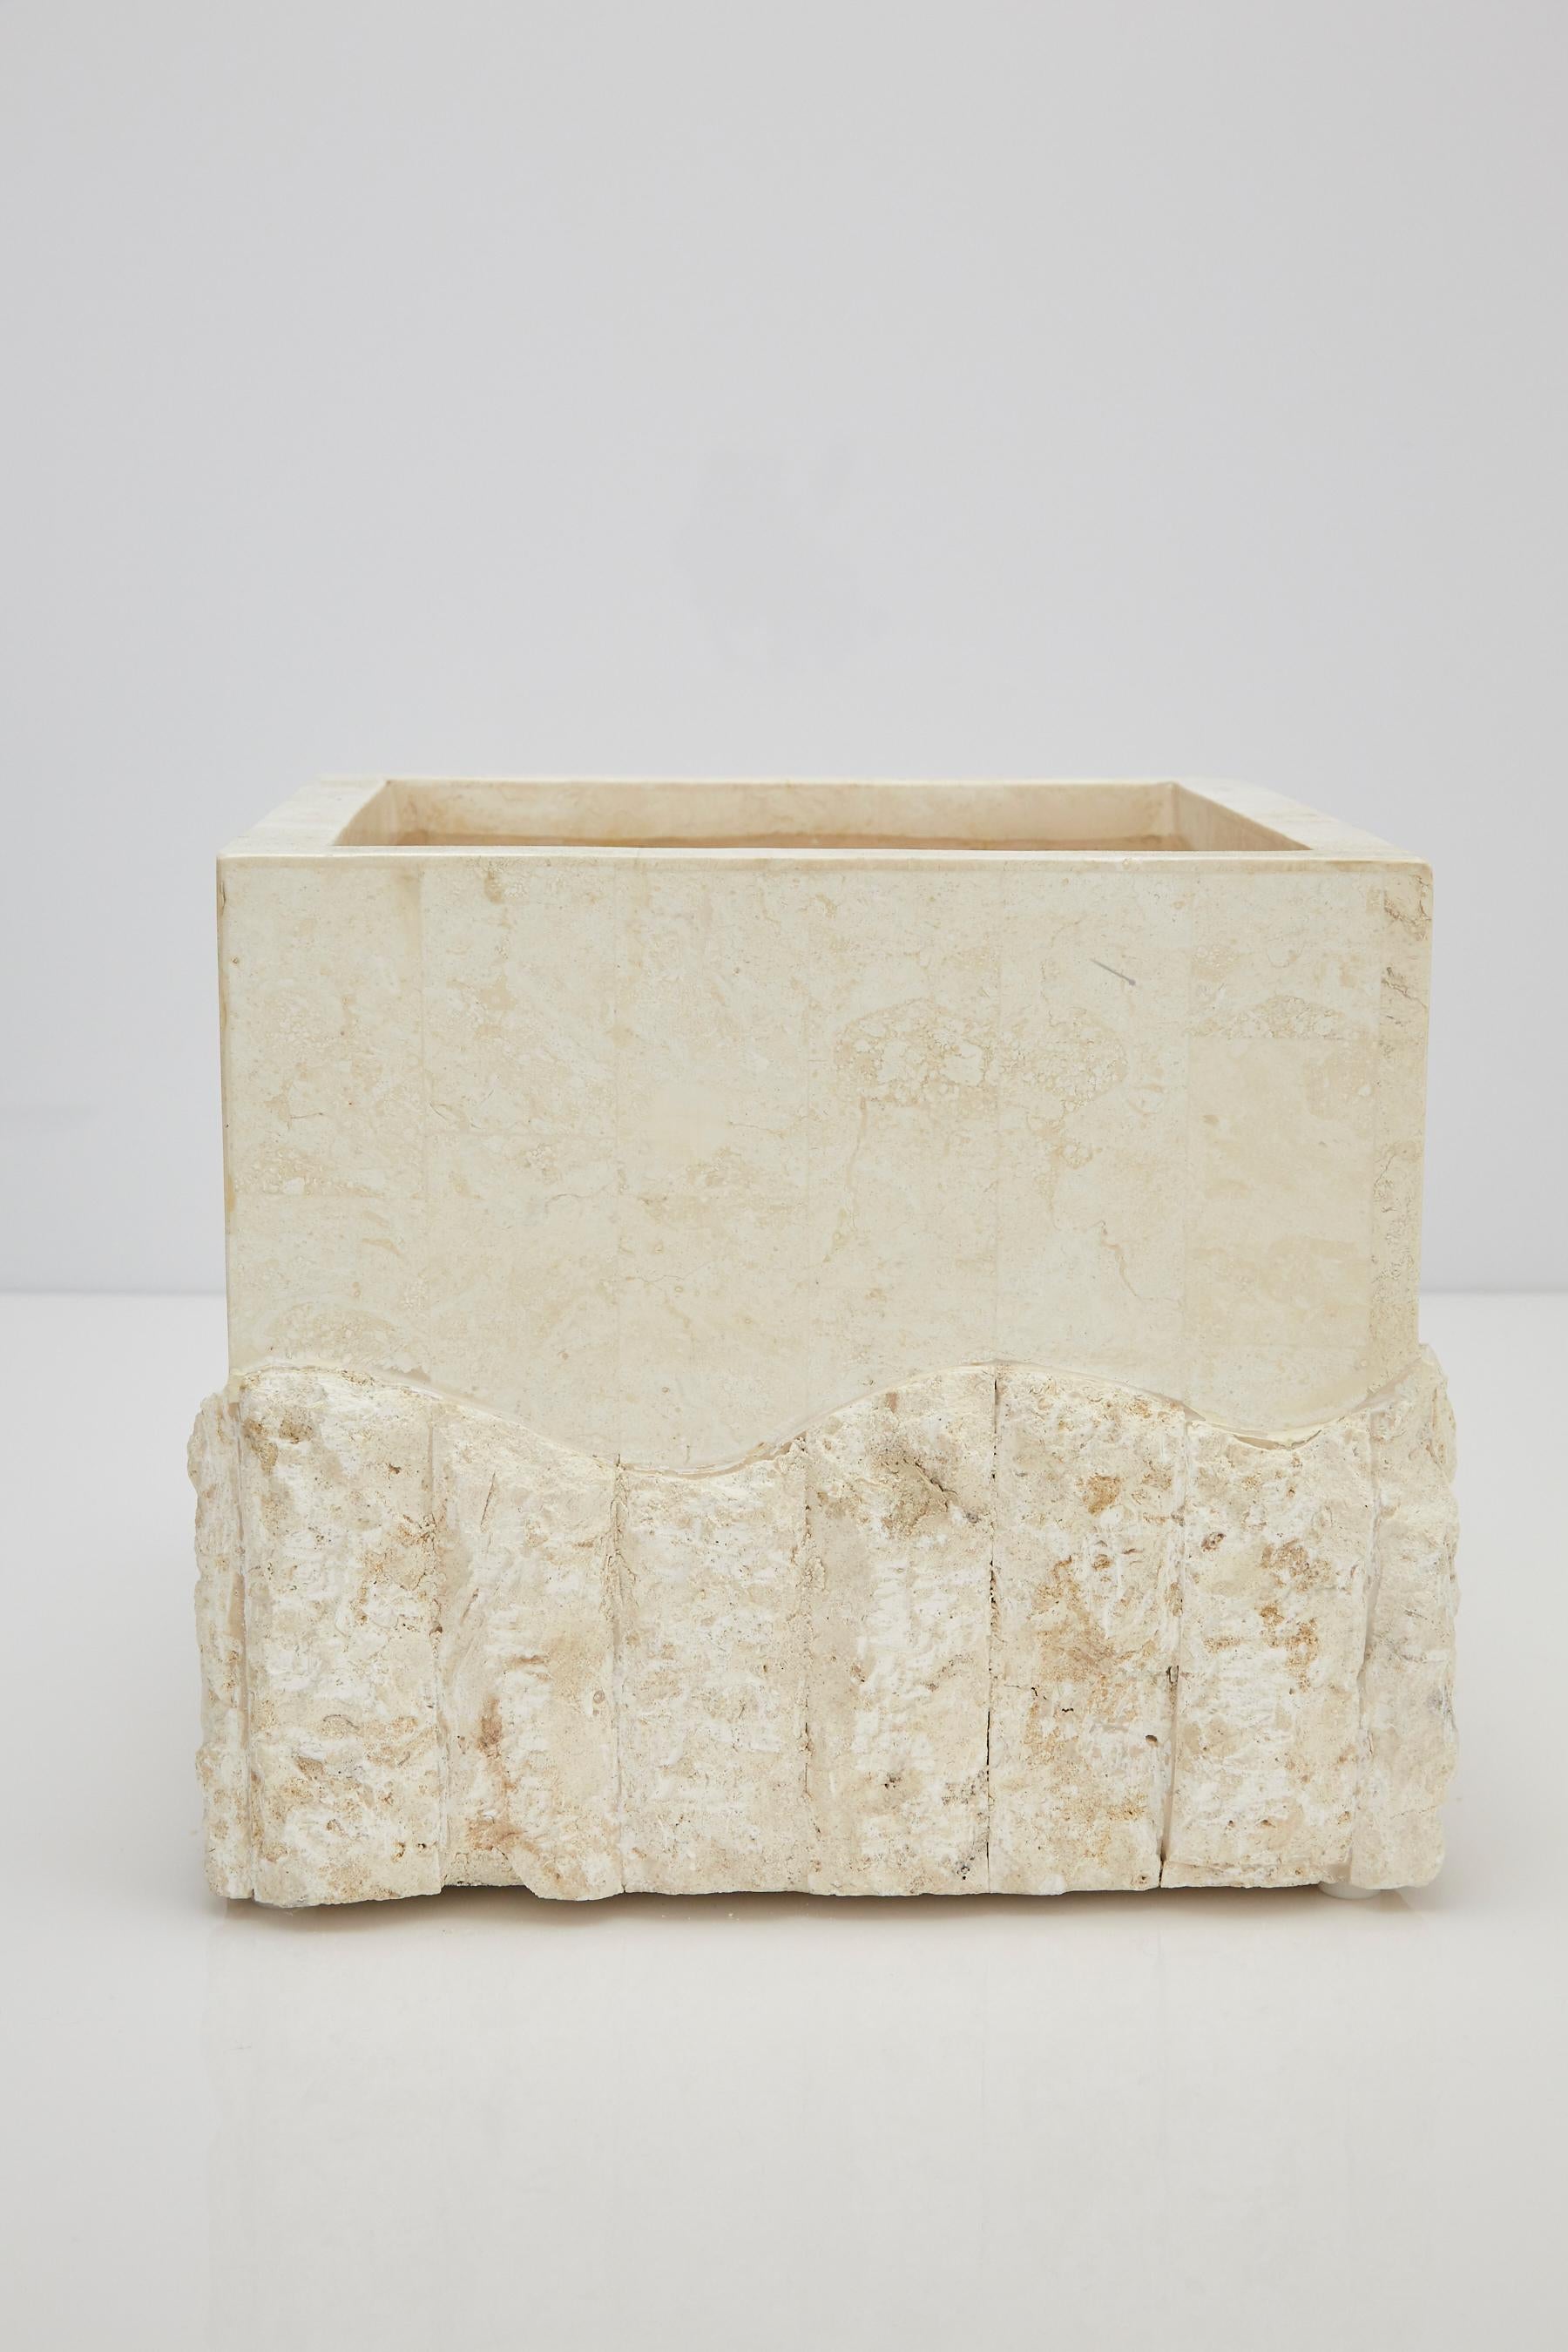 Inlay Medium Tessellated White Stone Square Rough and Smooth Planter, 1990s For Sale